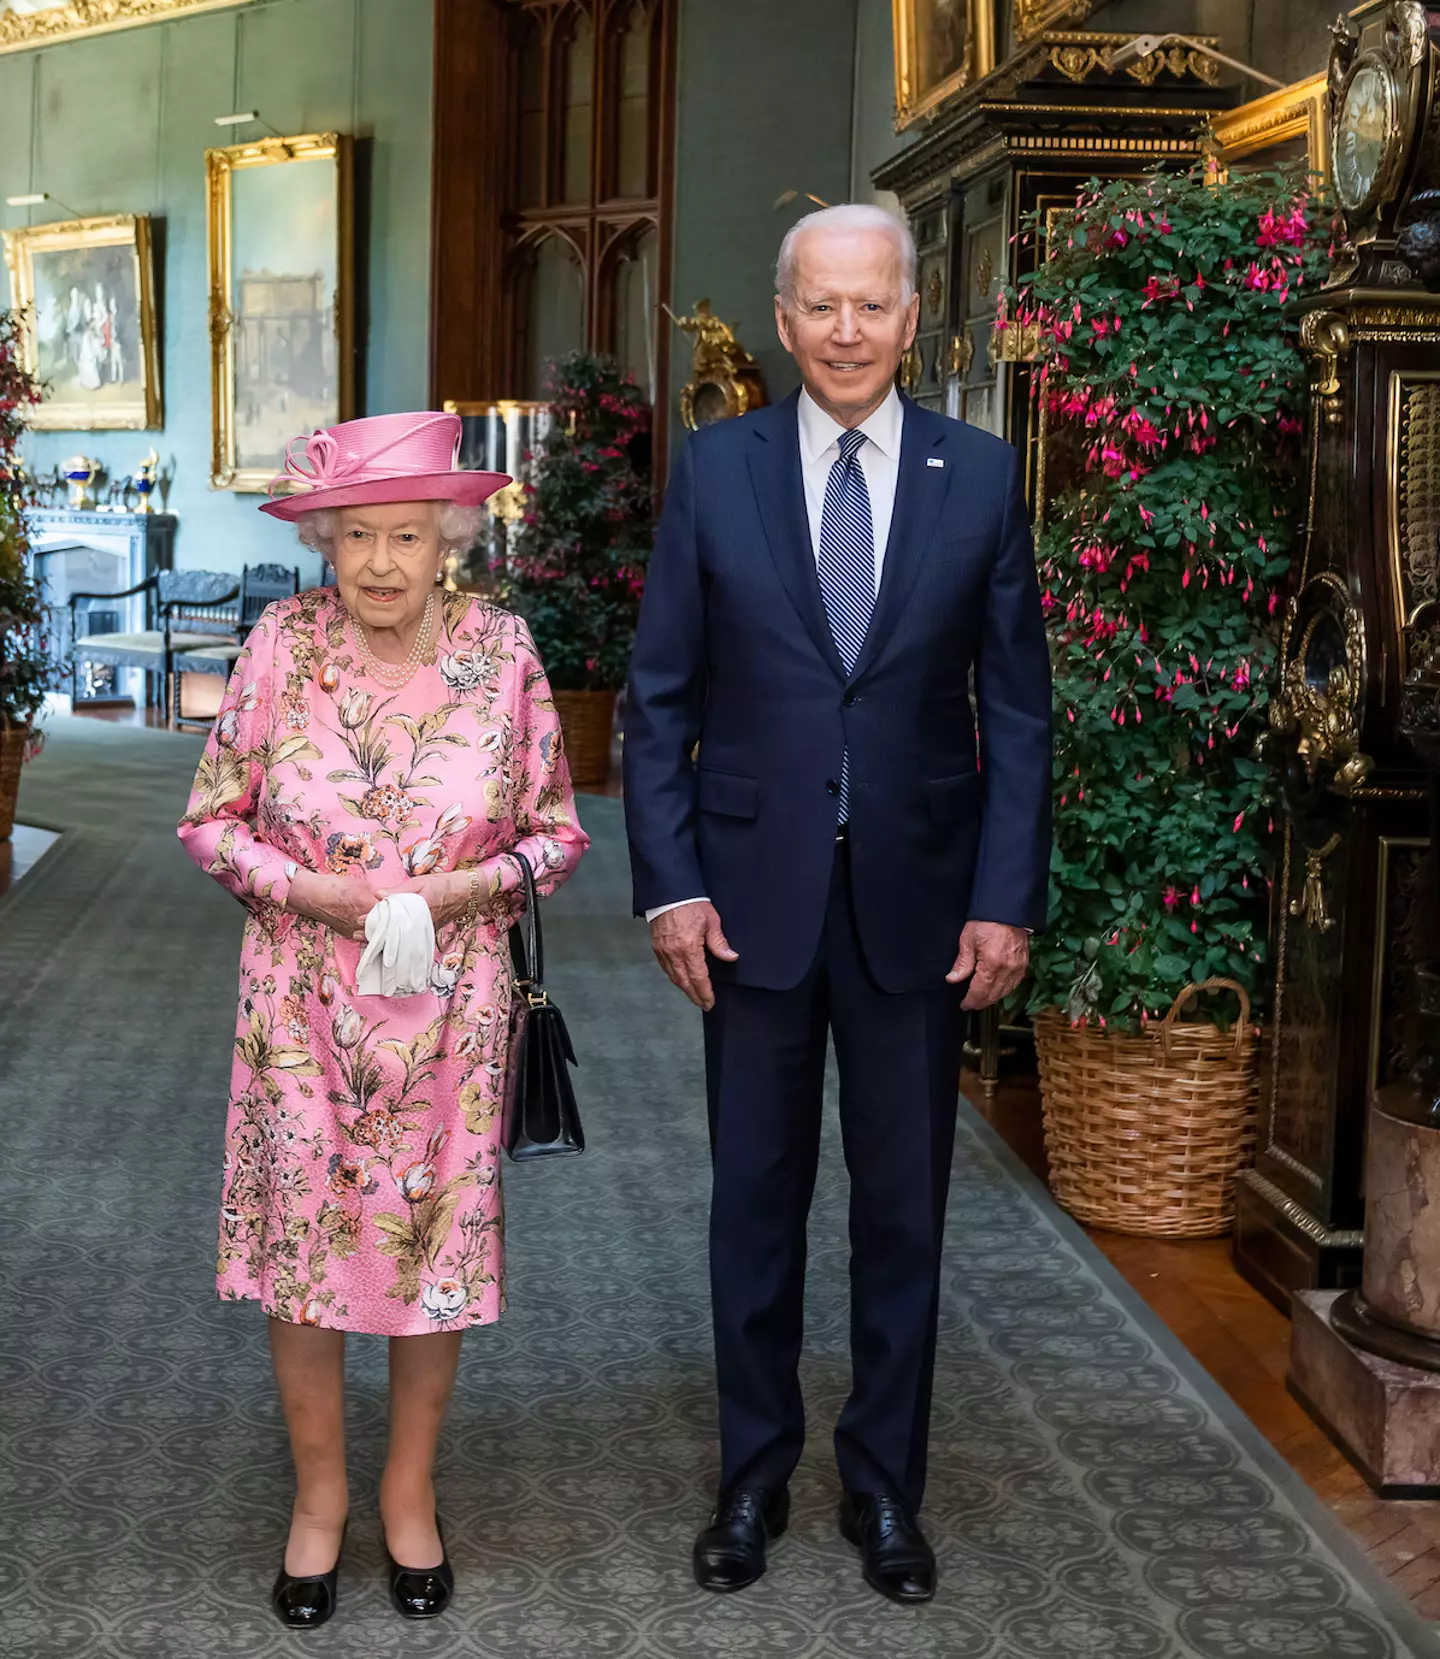 People were confused when Joe Biden compared Queen Elizabeth II to his late mum, Catherine Finnegan, who was known as Jean.